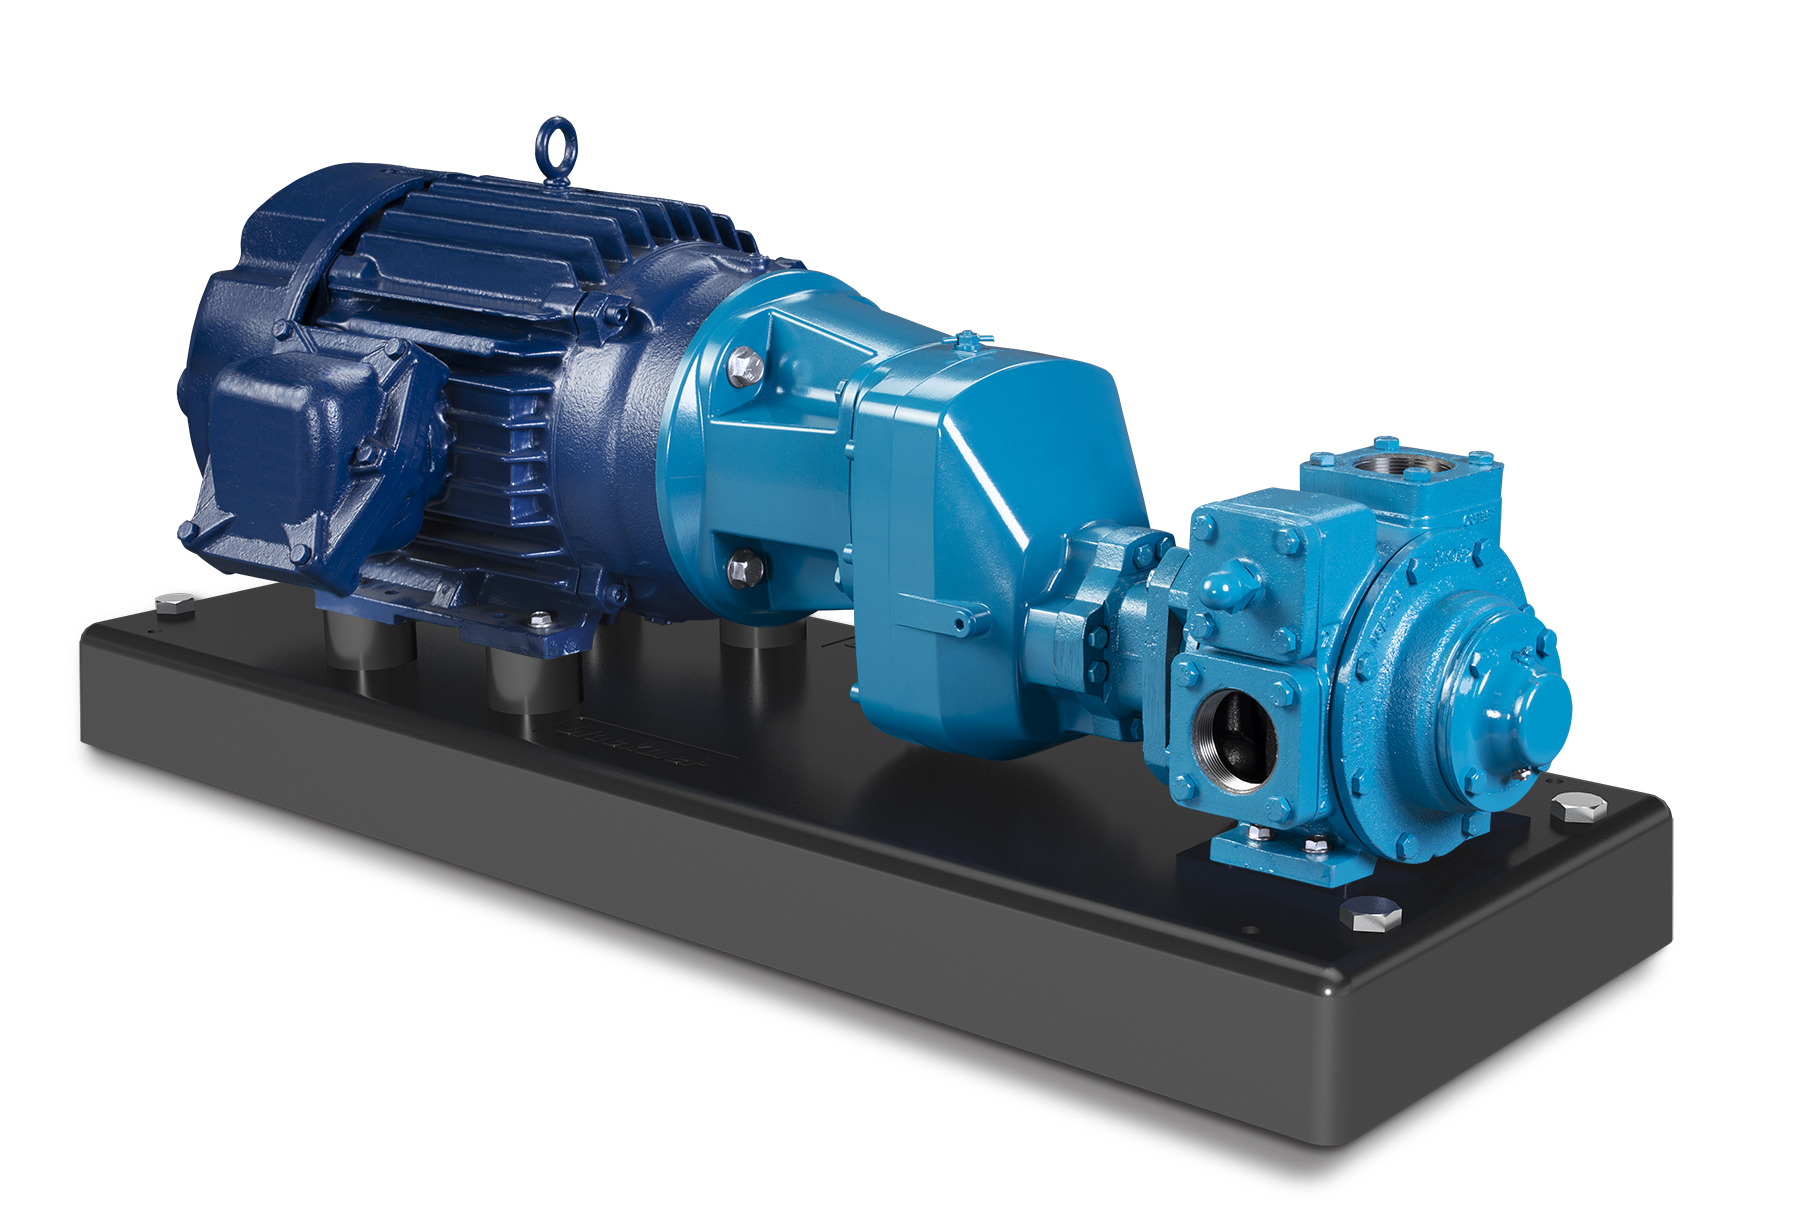 The GNX Series has been designed for the transfer of non-corrosive, non-abrasive industrial and petroleum products.